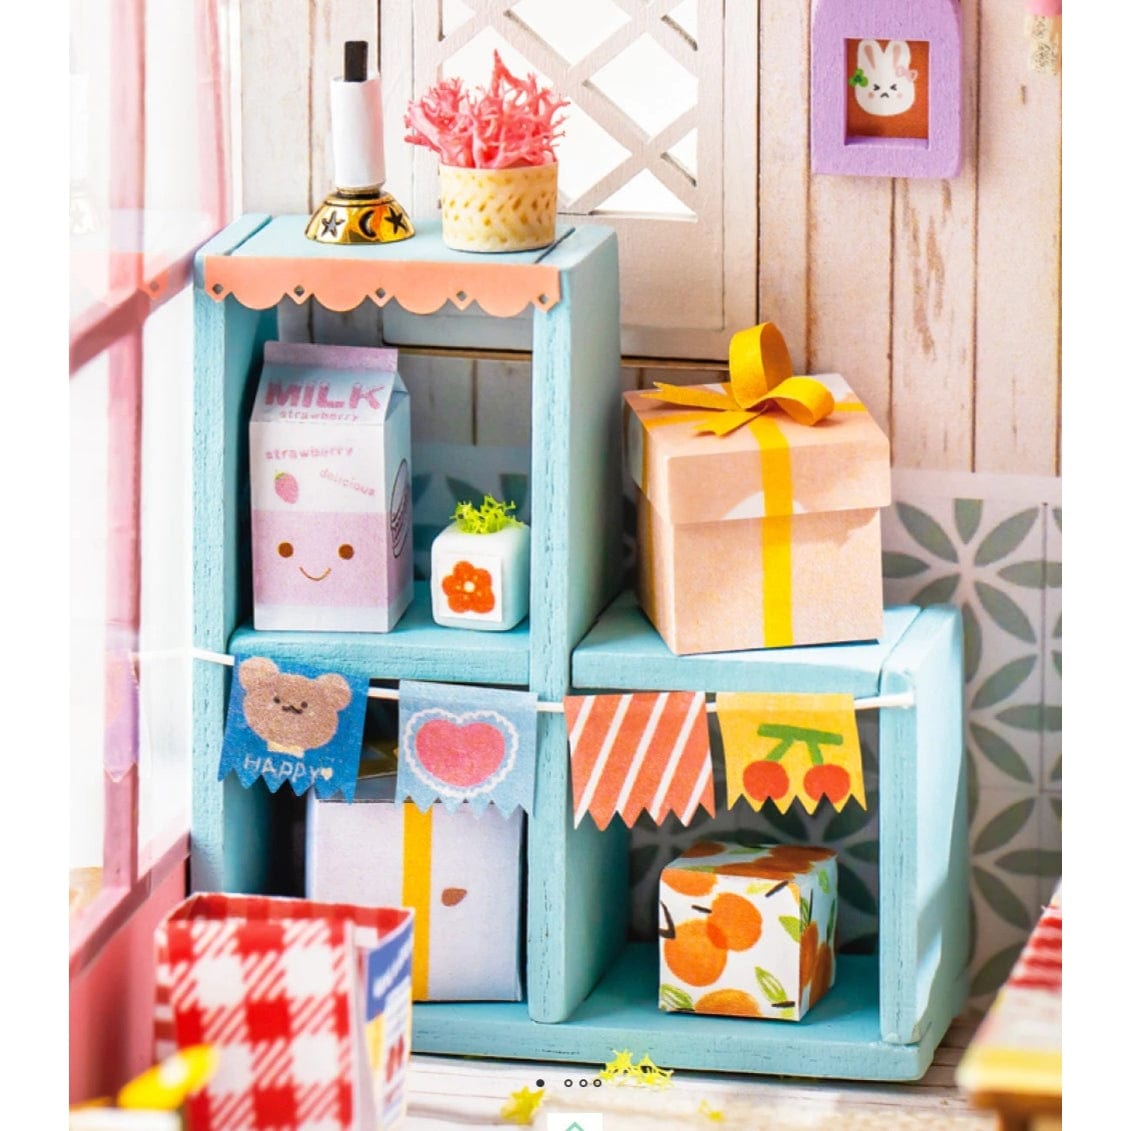 Hands Craft Store: DIY Miniature Dollhouse Kits and 3D Wooden Puzzles –  Hands Craft US, Inc.